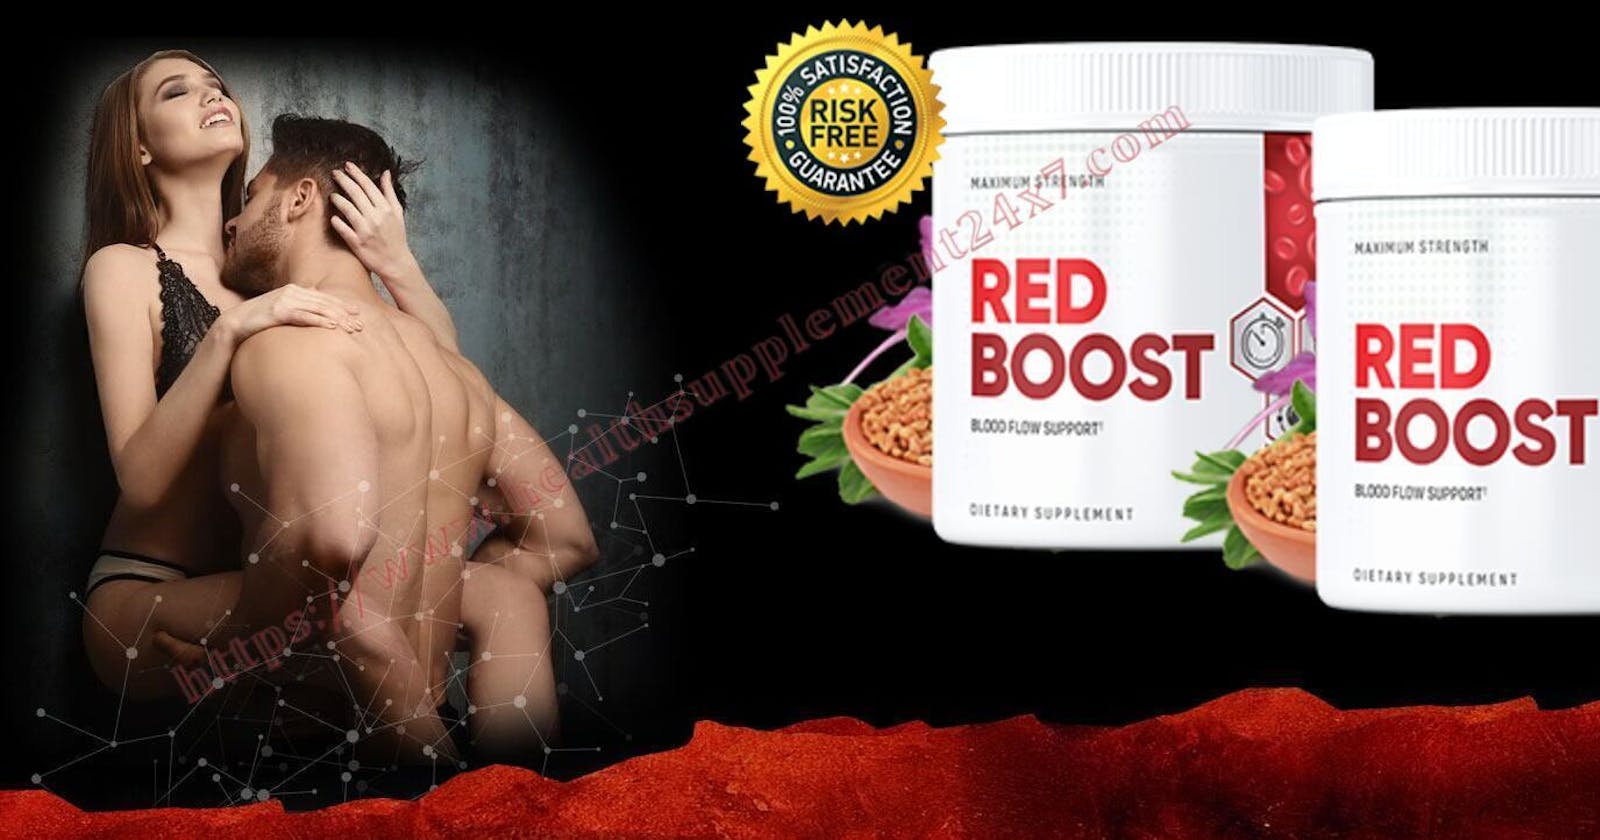 Hard Wood Tonic Red Boost #1 Premium Booster For Blood Flow, Longer Endurance, Larger Erection(WORK OR HOAX)